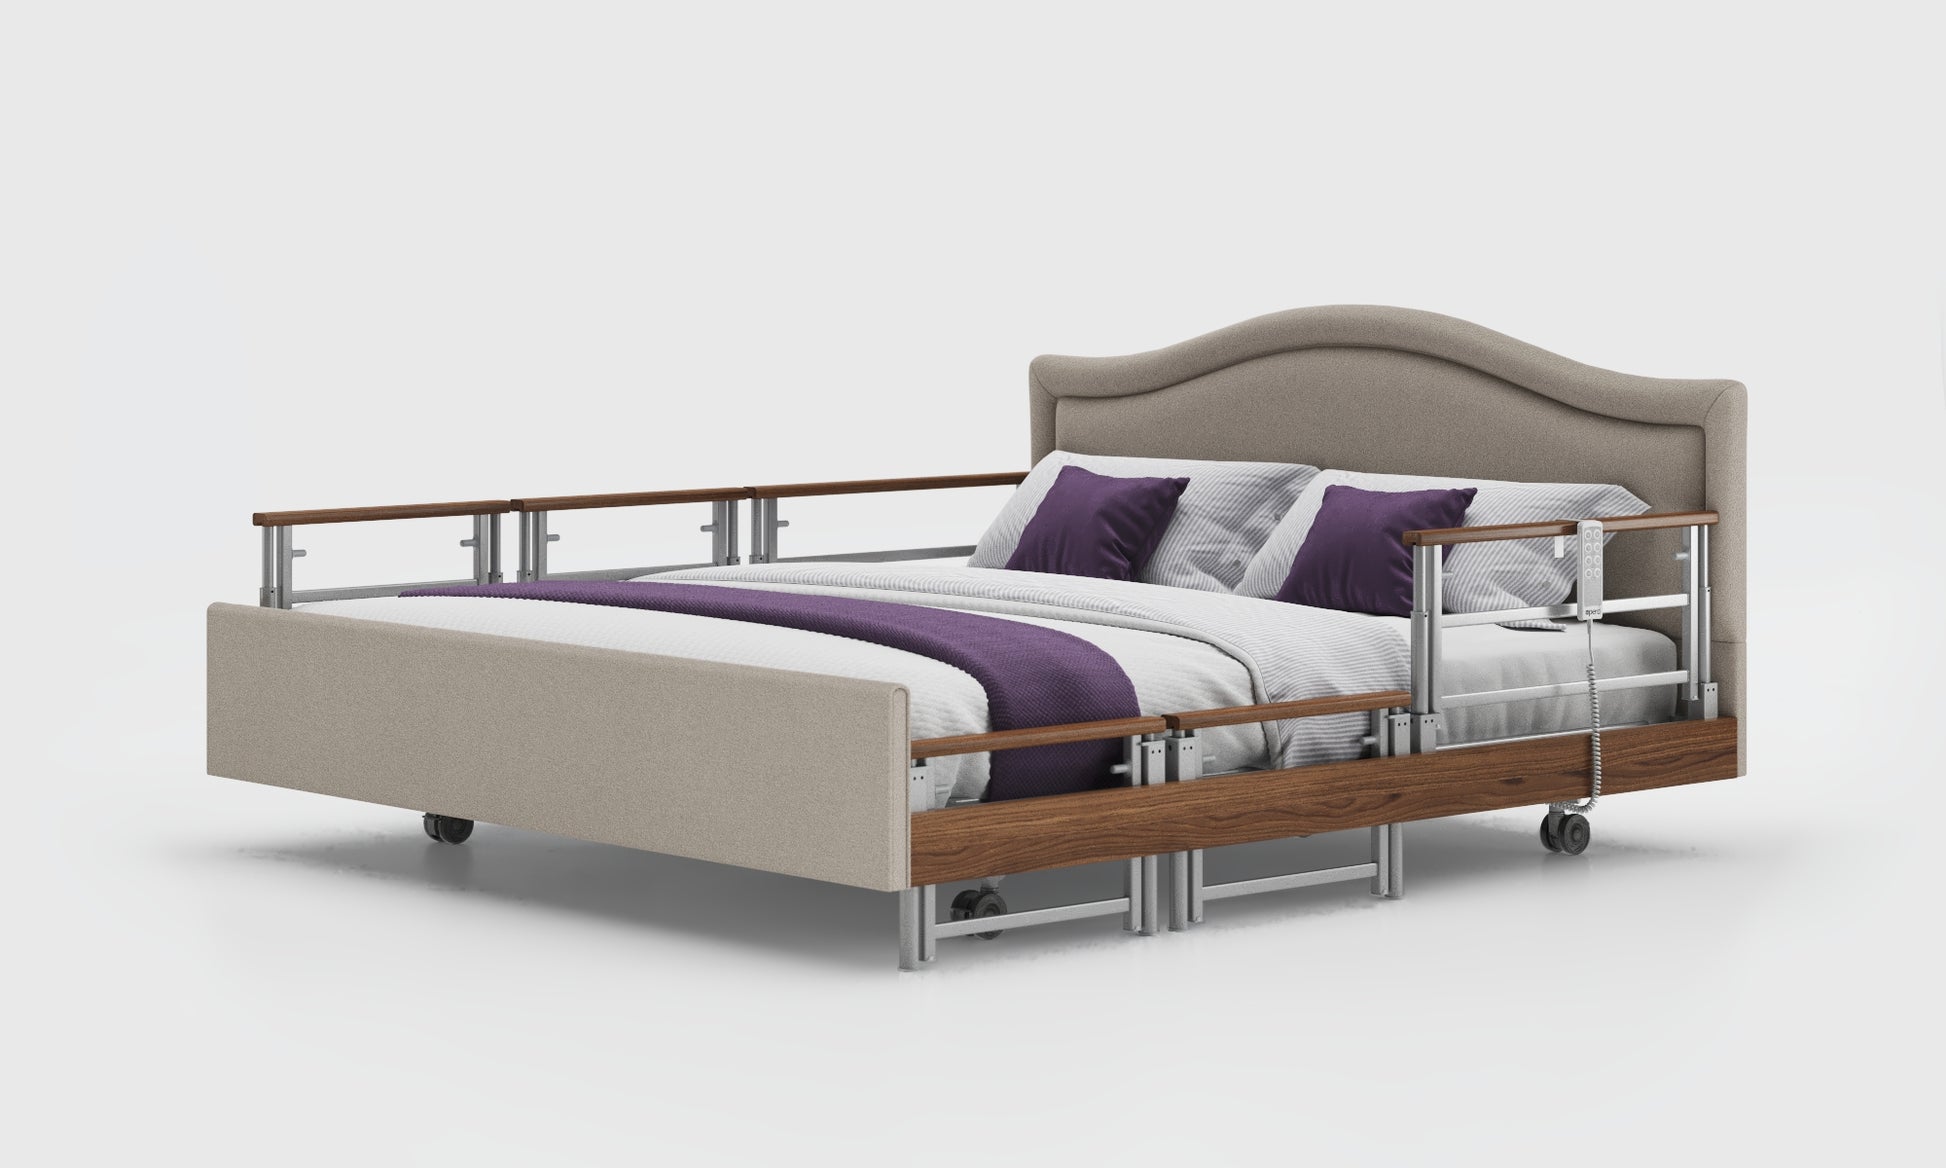 Signature comfort 3ft bed with walnut tri rails and pearl headboard in linen material